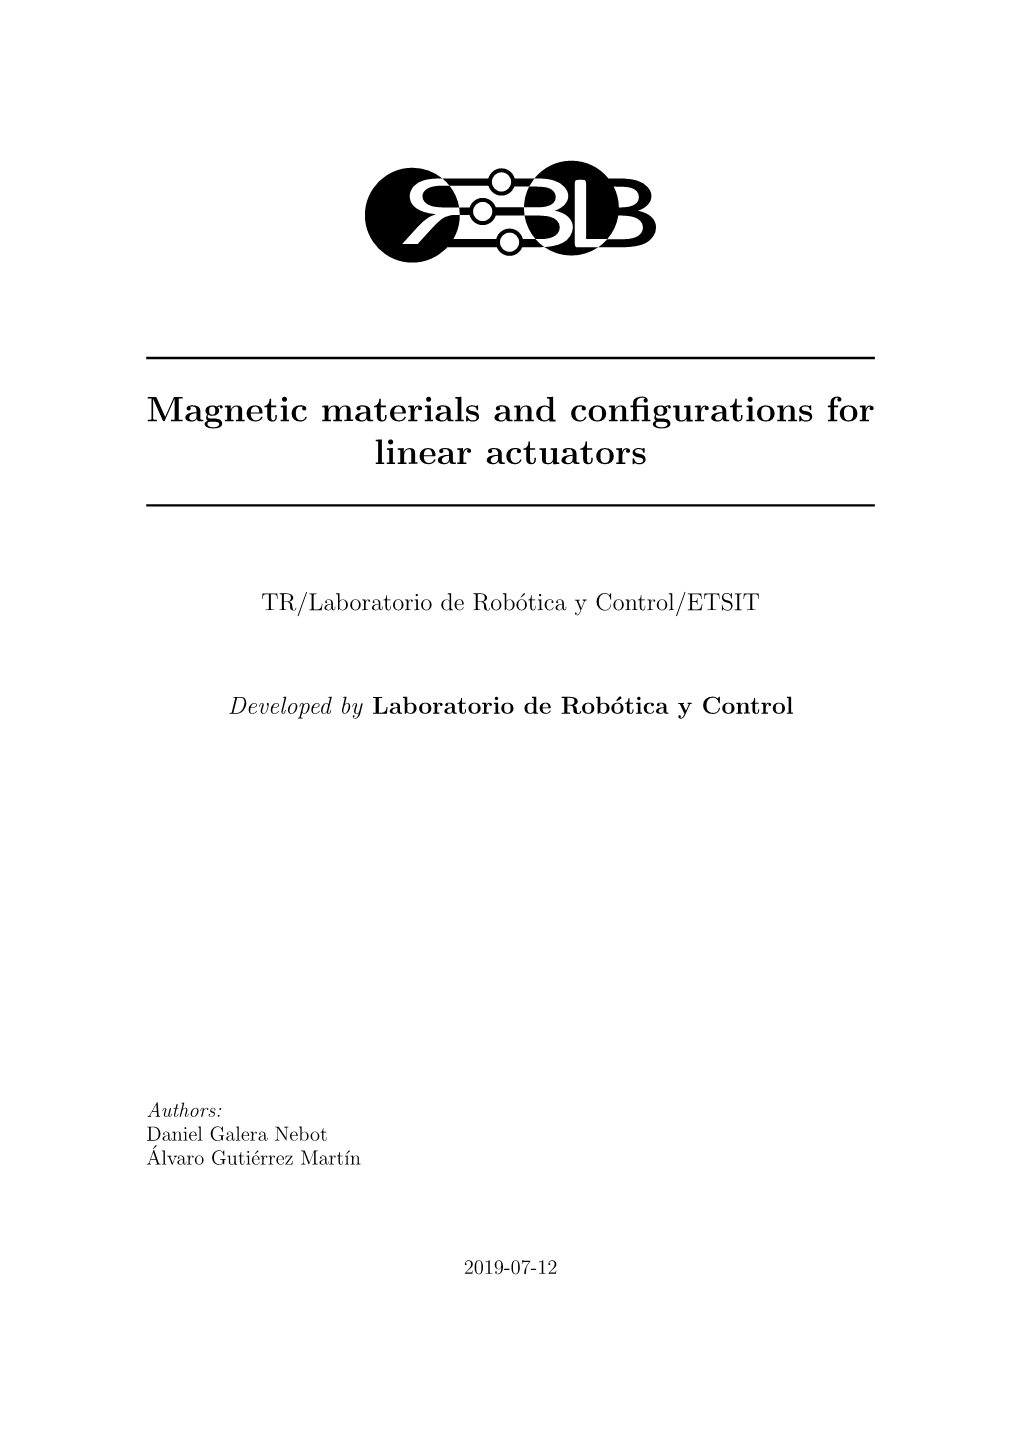 Magnetic Materials and Configurations for Linear Actuators